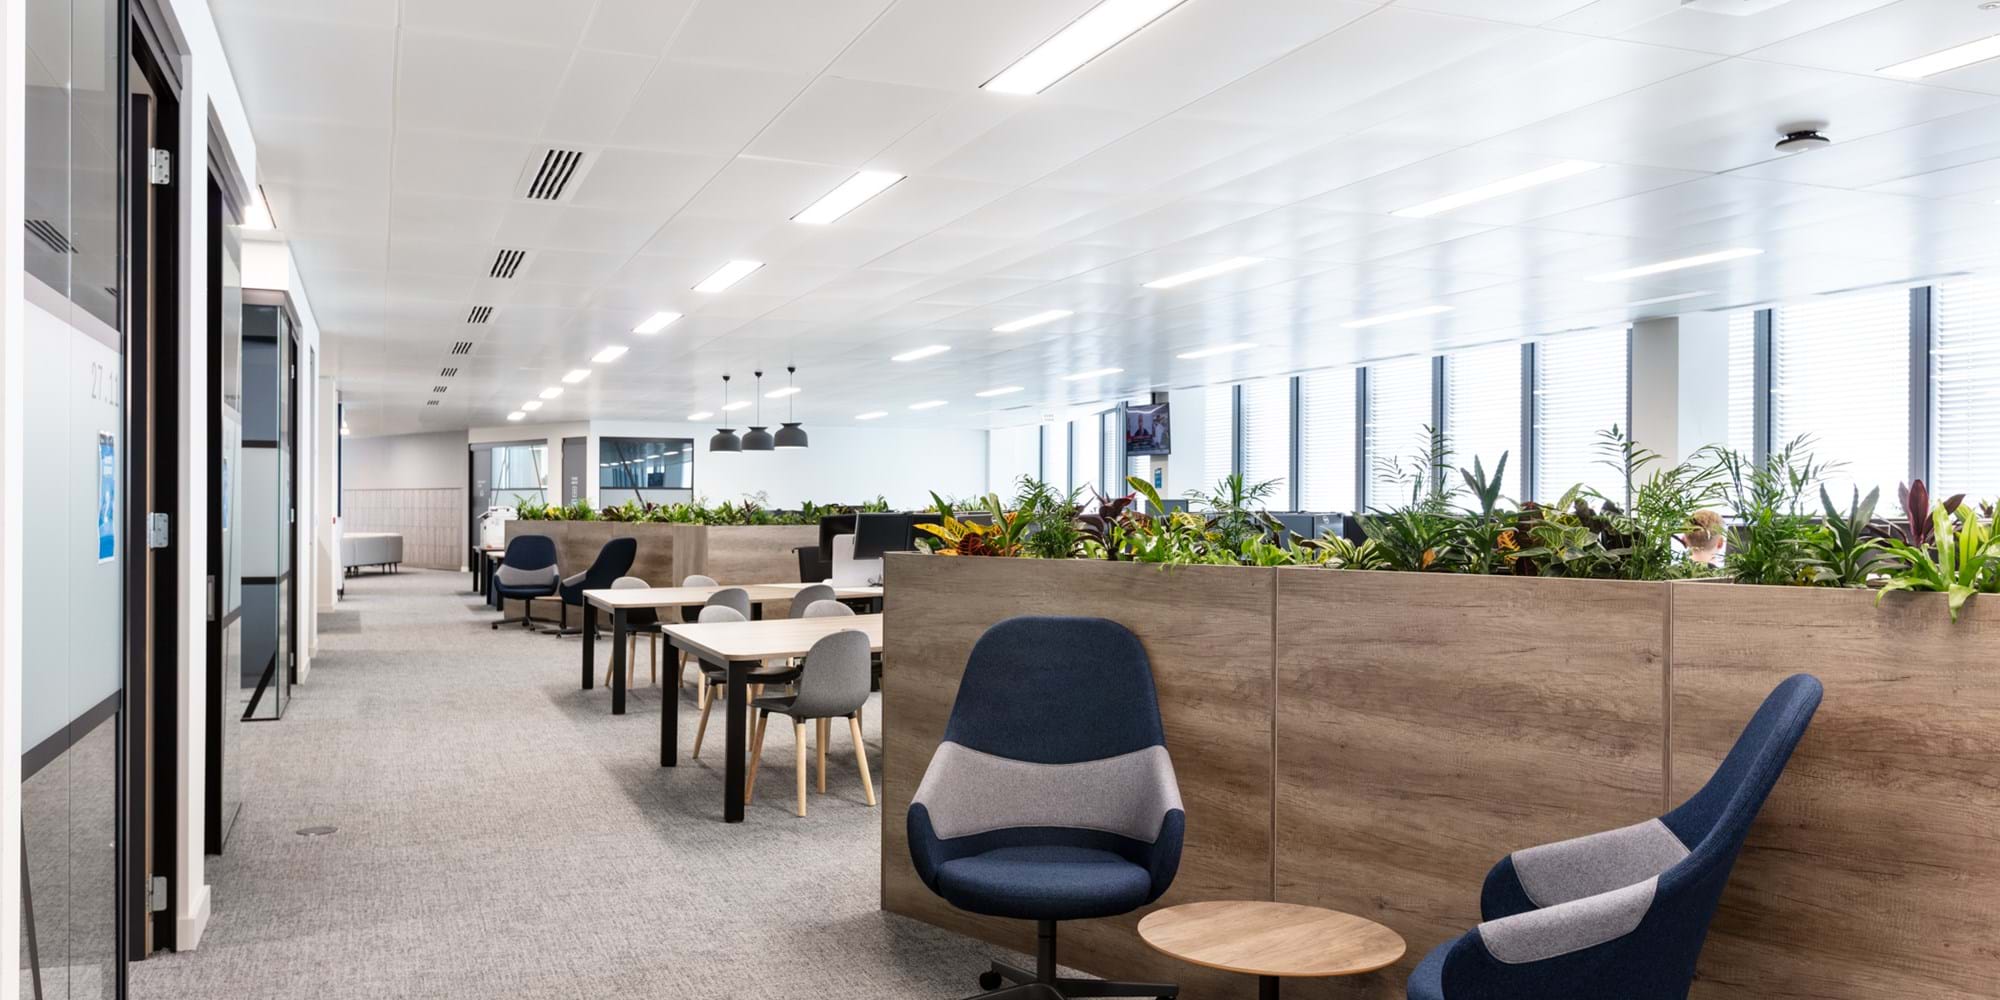 Modus Workspace office design, fit out and refurbishment - Insurance and Risk Management Firm - Modus_Verisk_Day2-15.jpg